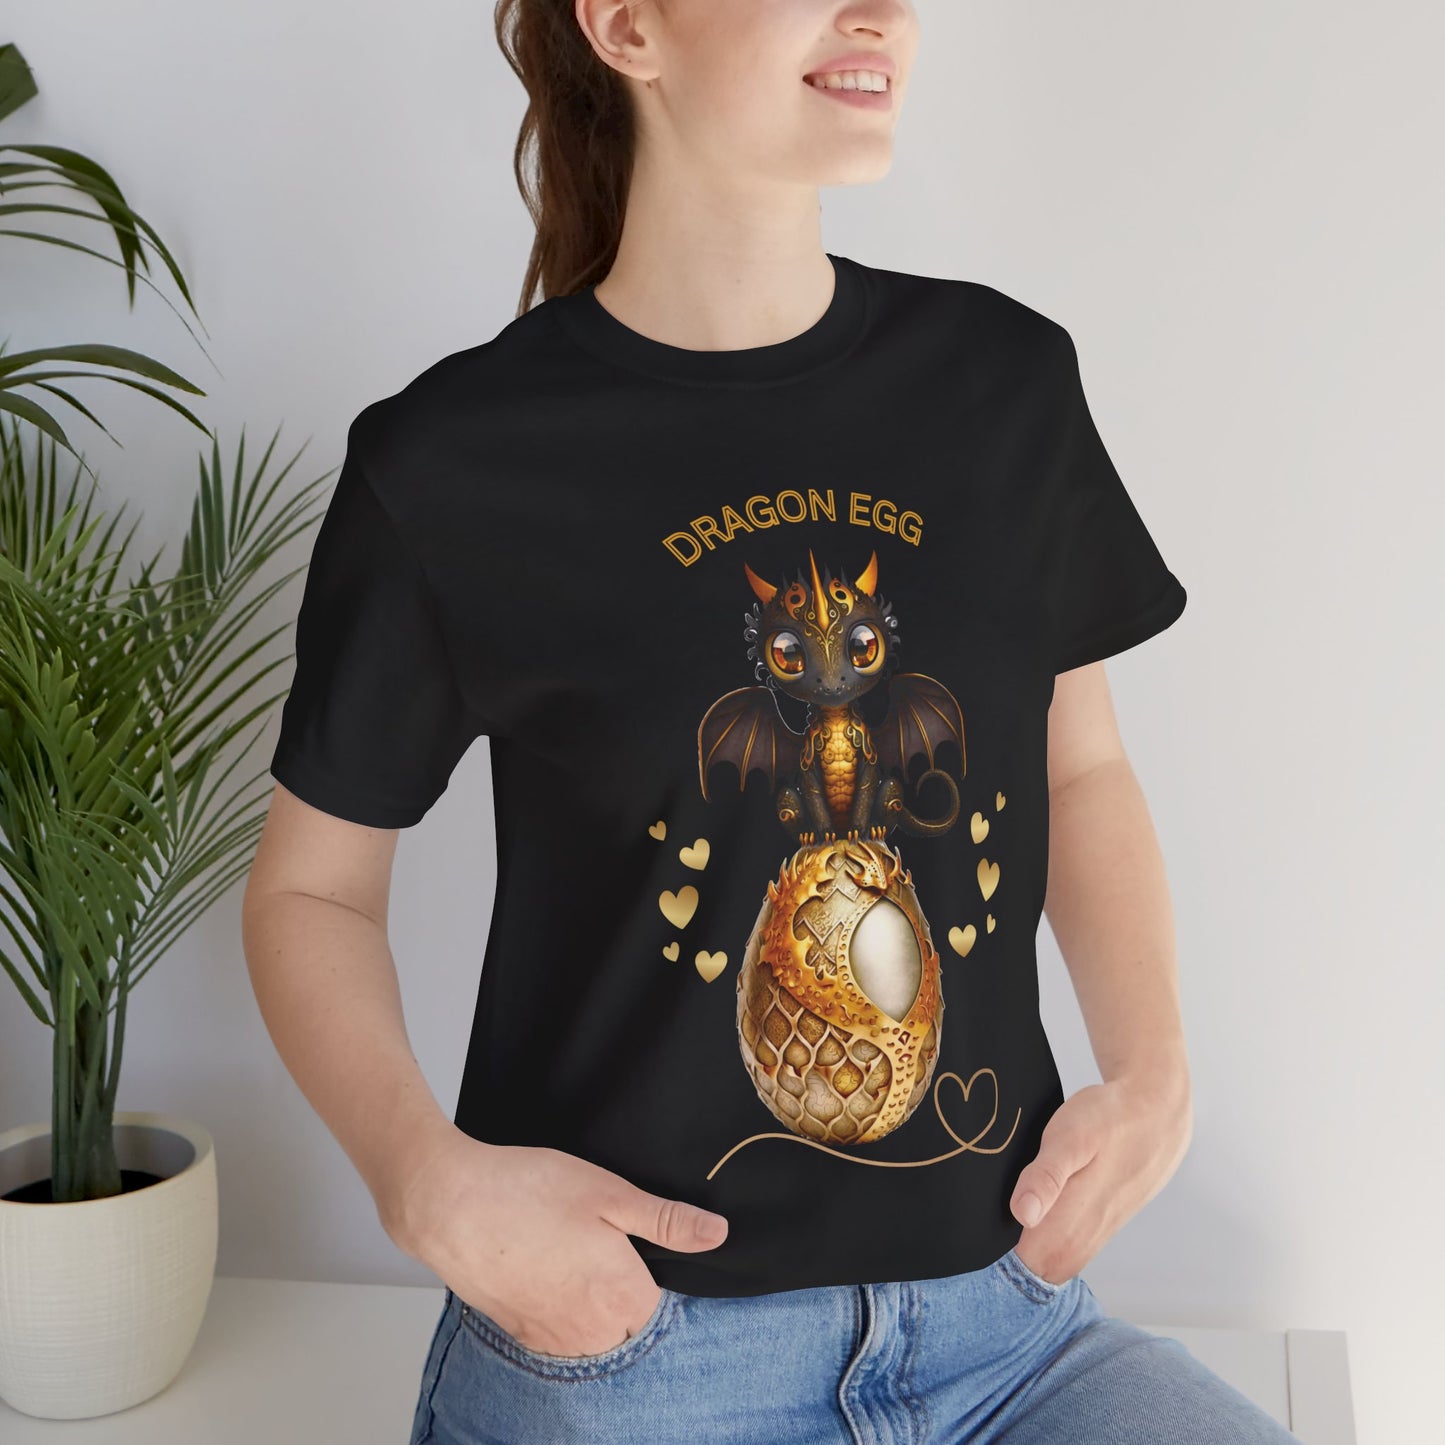 A golden dragons egg with a brown & gold cute baby dragon with gold horns & wings out sits on top of her golden egg- hearts float up out of both sides of the egg - Text says Dragons Egg above the baby dragon and her golden dragon egg.